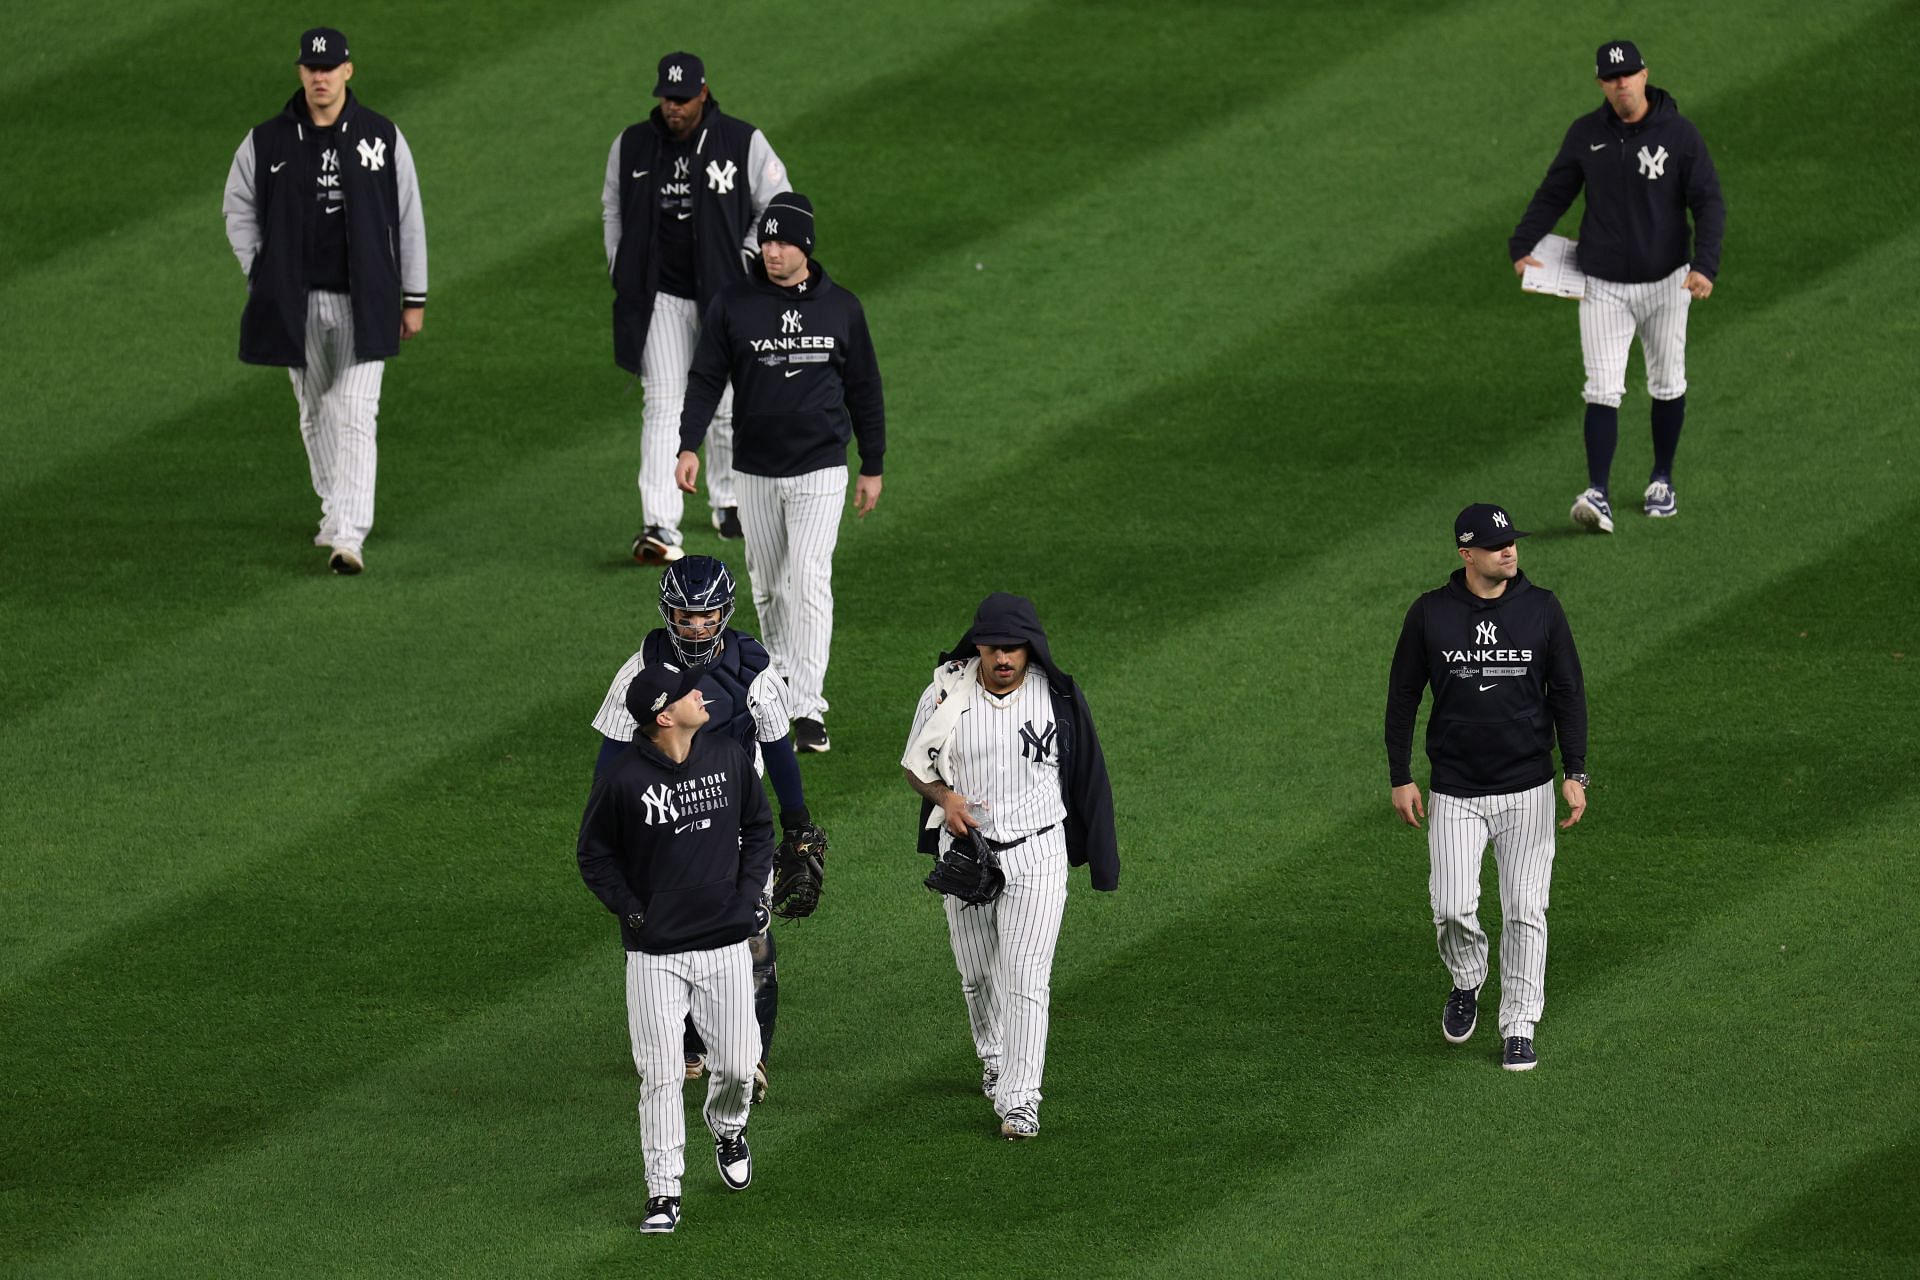 New York Yankees fans agitated as team reveals sponsored jersey patch: You  can't do this to a Yankee uniform Soon it will look like Nascar